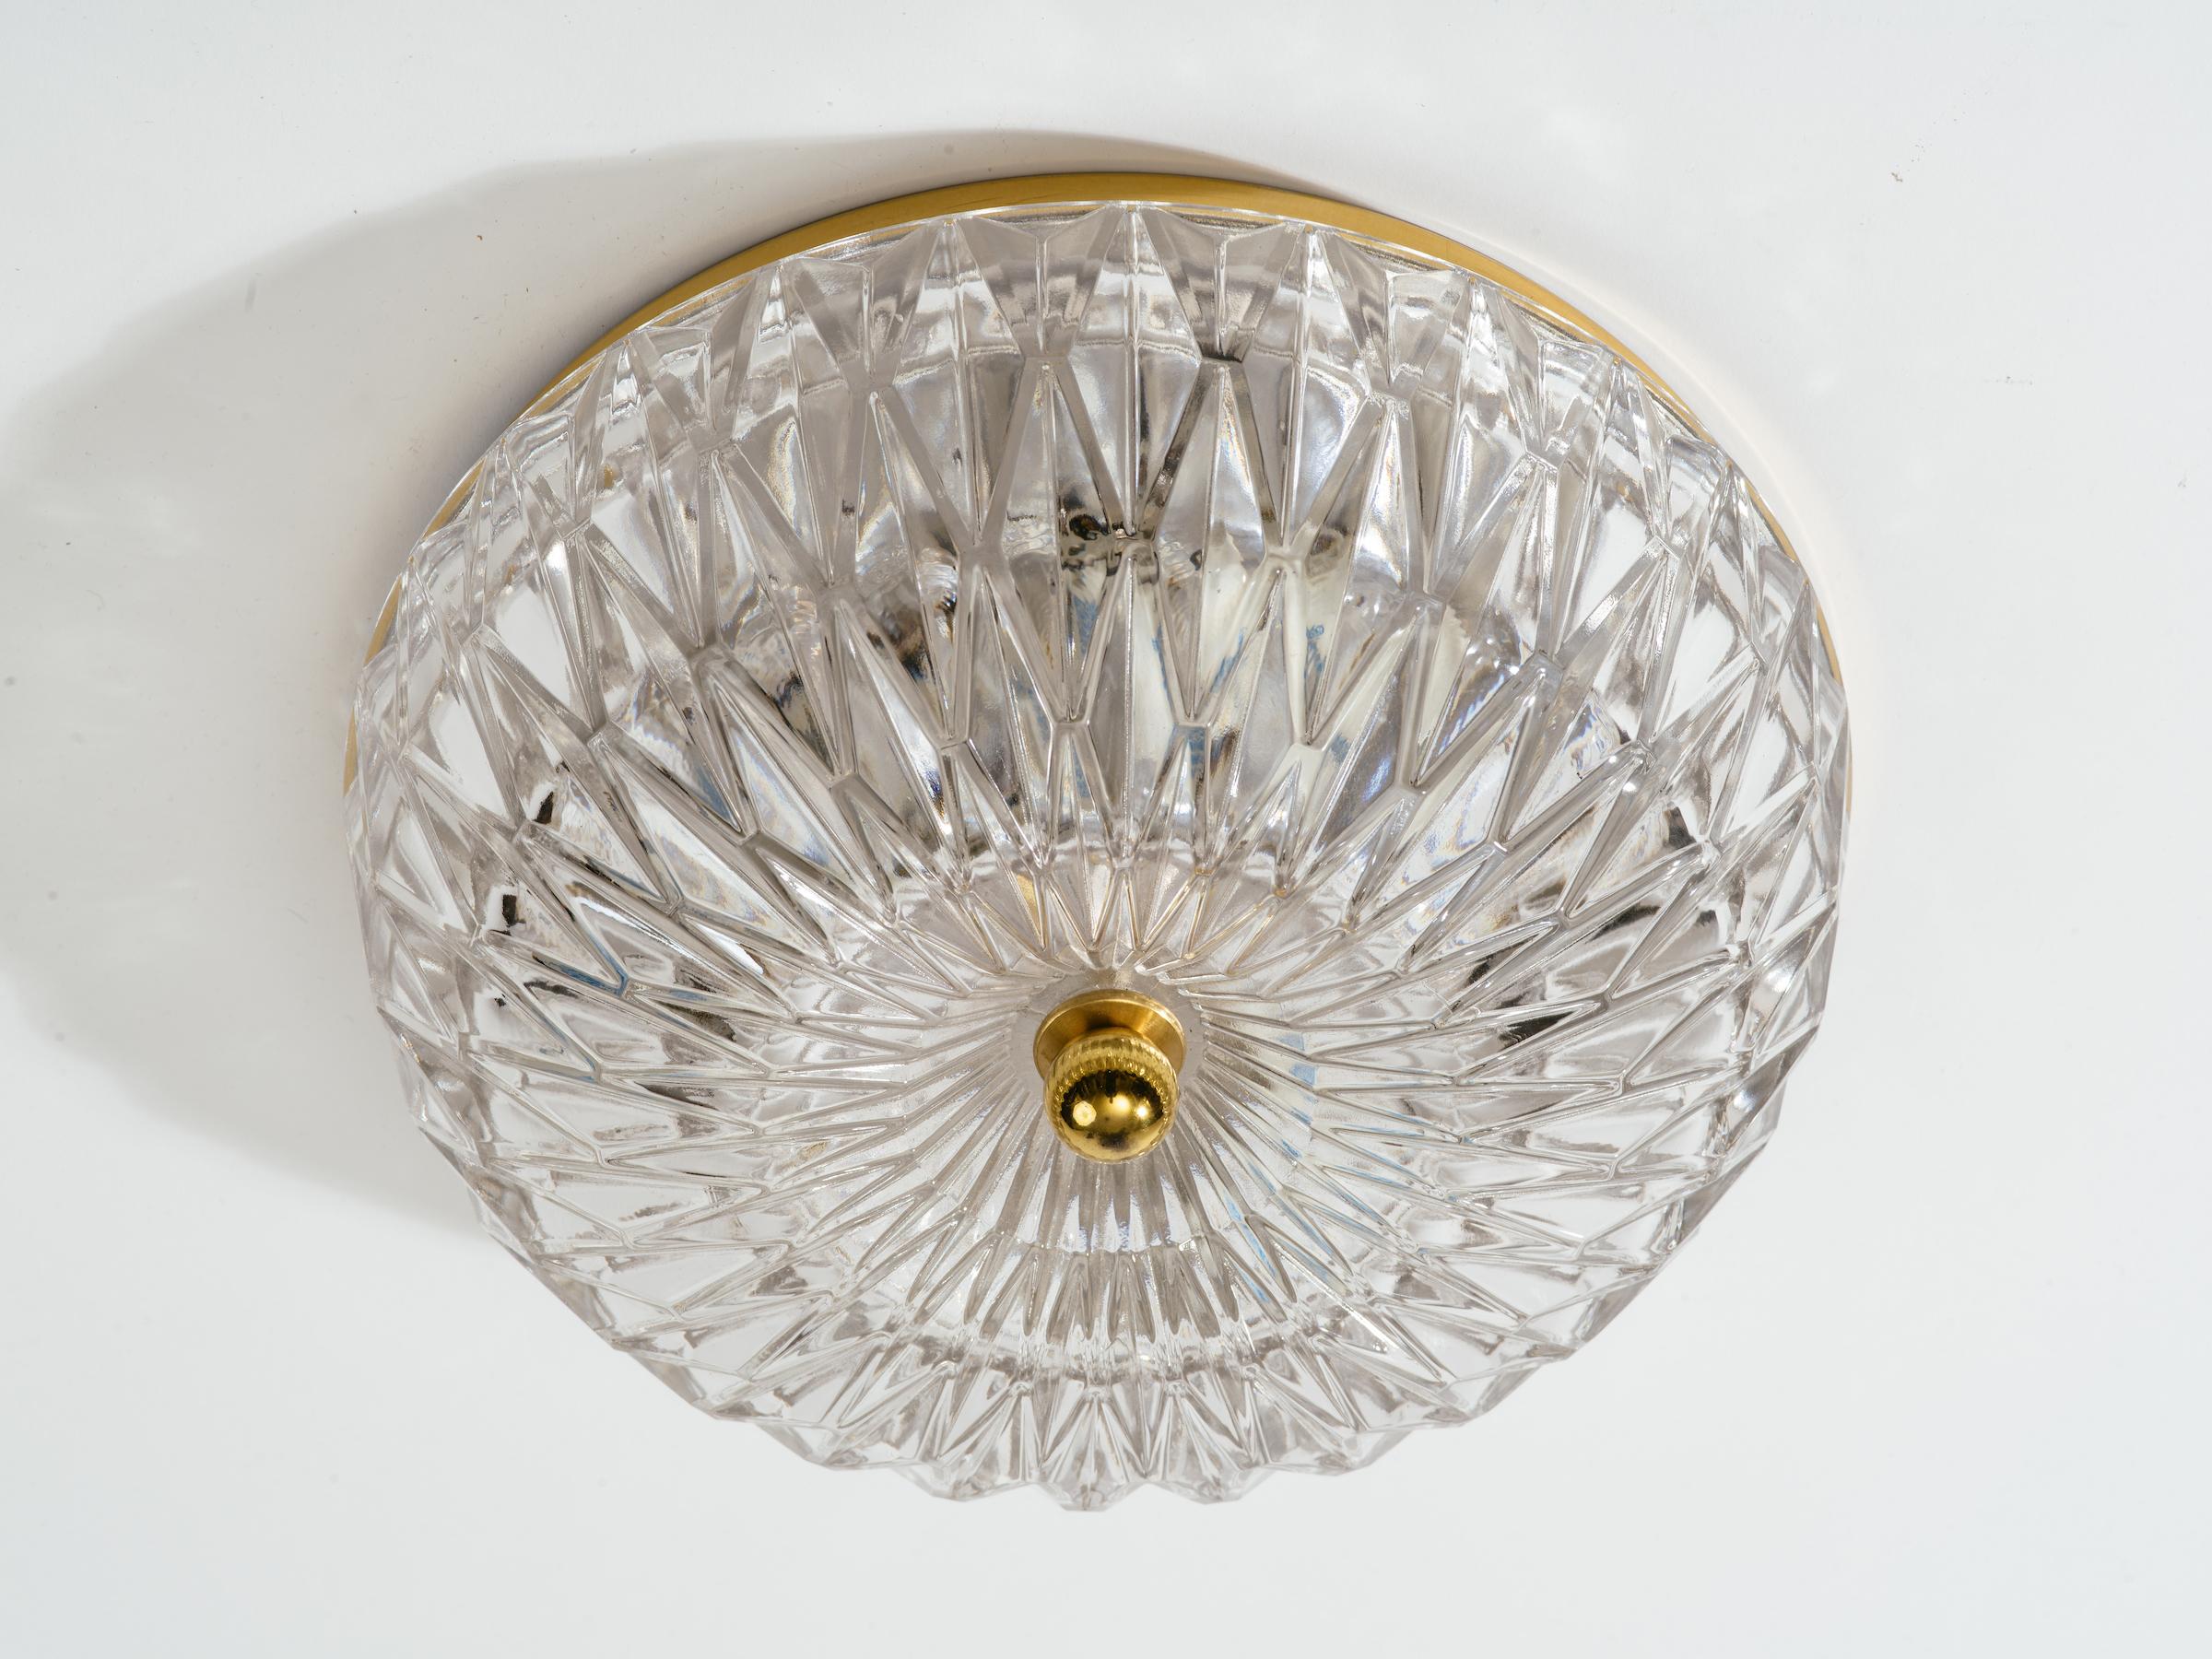 German cut glass dome flush mount chandelier with brass rim and finial by Lightolier, circa 1960s.  Paper label attached.